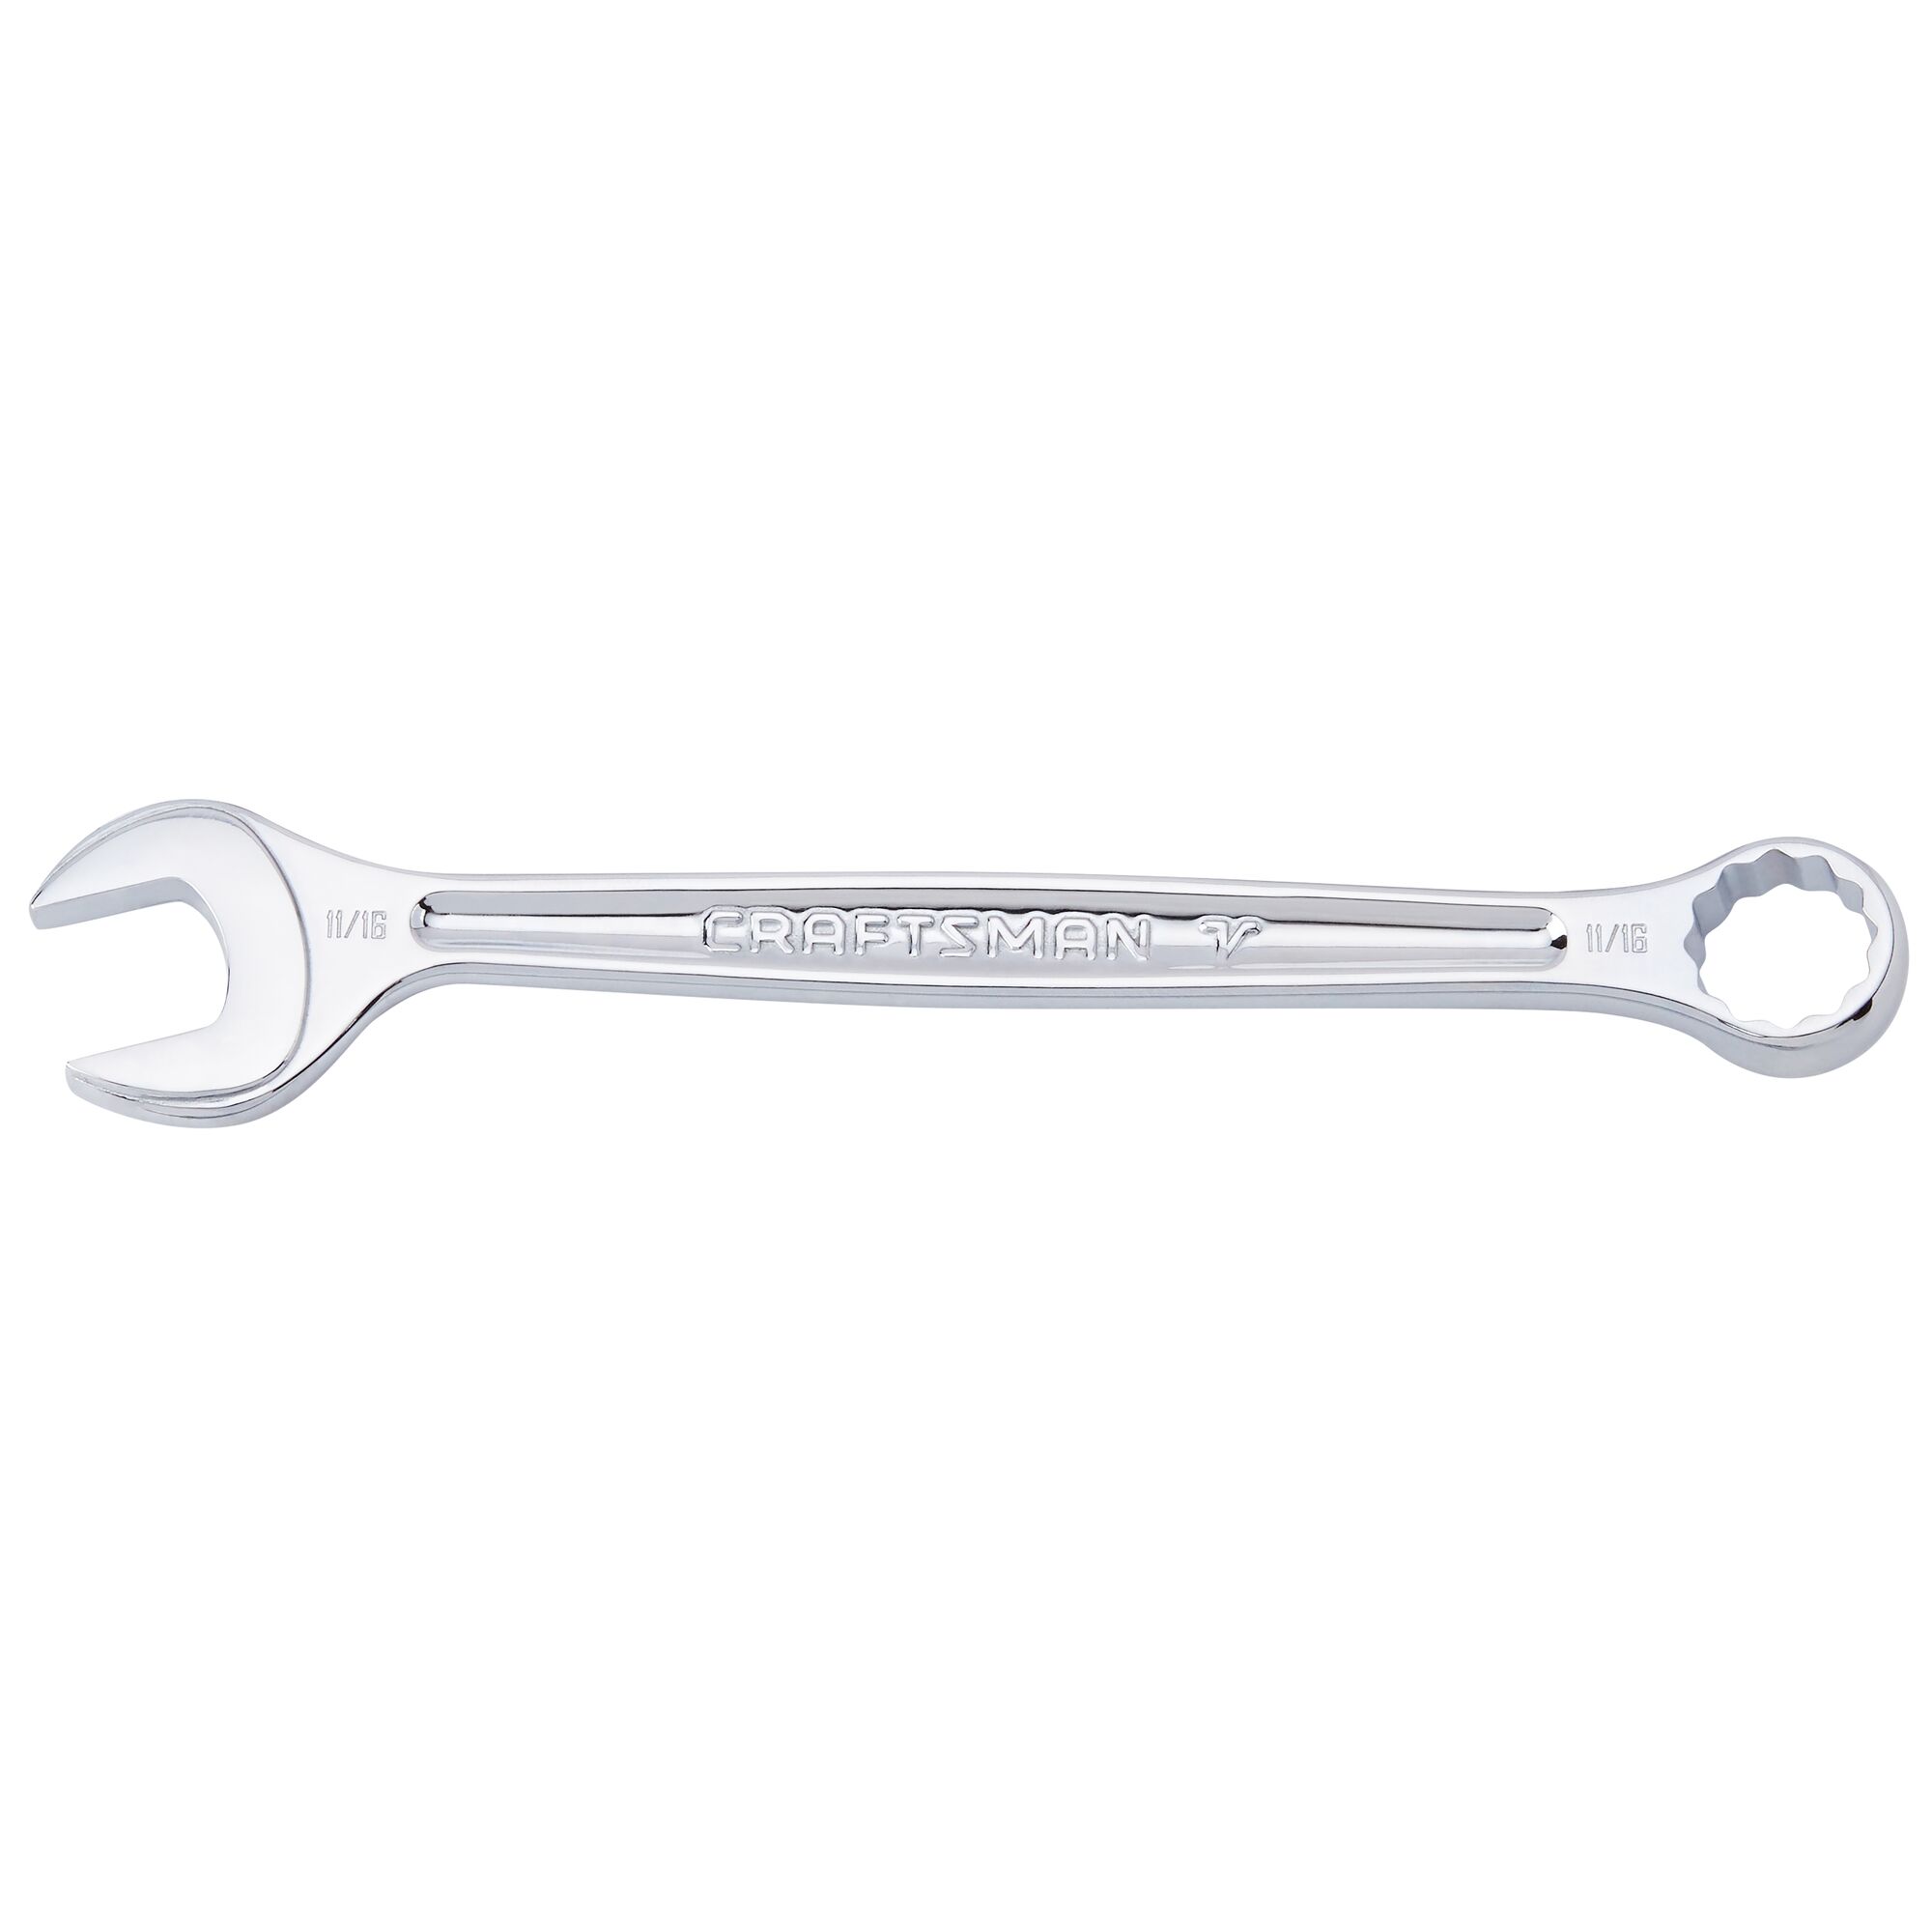 CRAFTSMAN V-SERIES Combo Wrench 11/16 